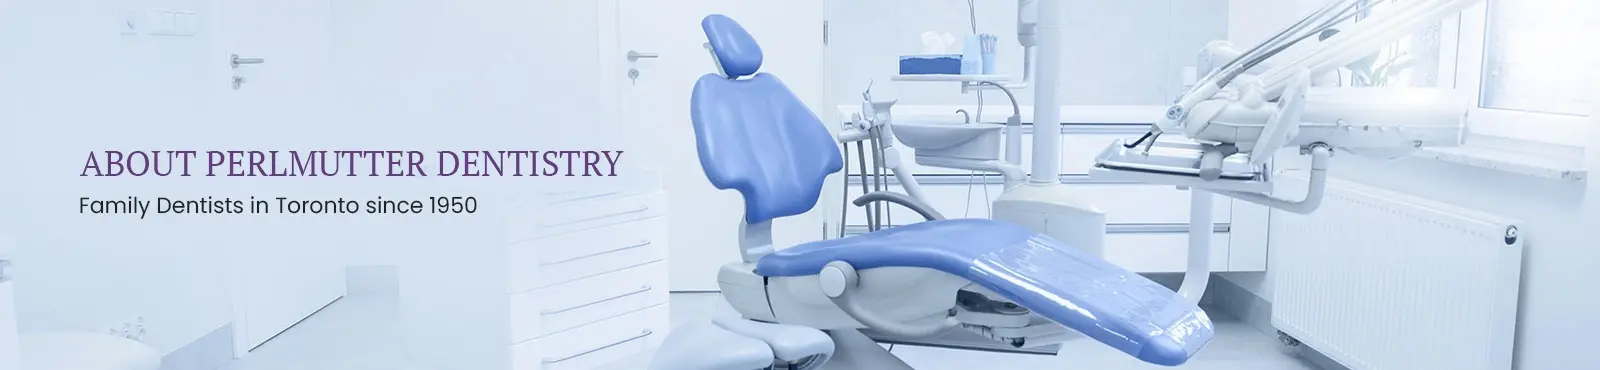 Experience unparalleled High-Quality Dentistry in the heart of Toronto, ensuring your smile's health